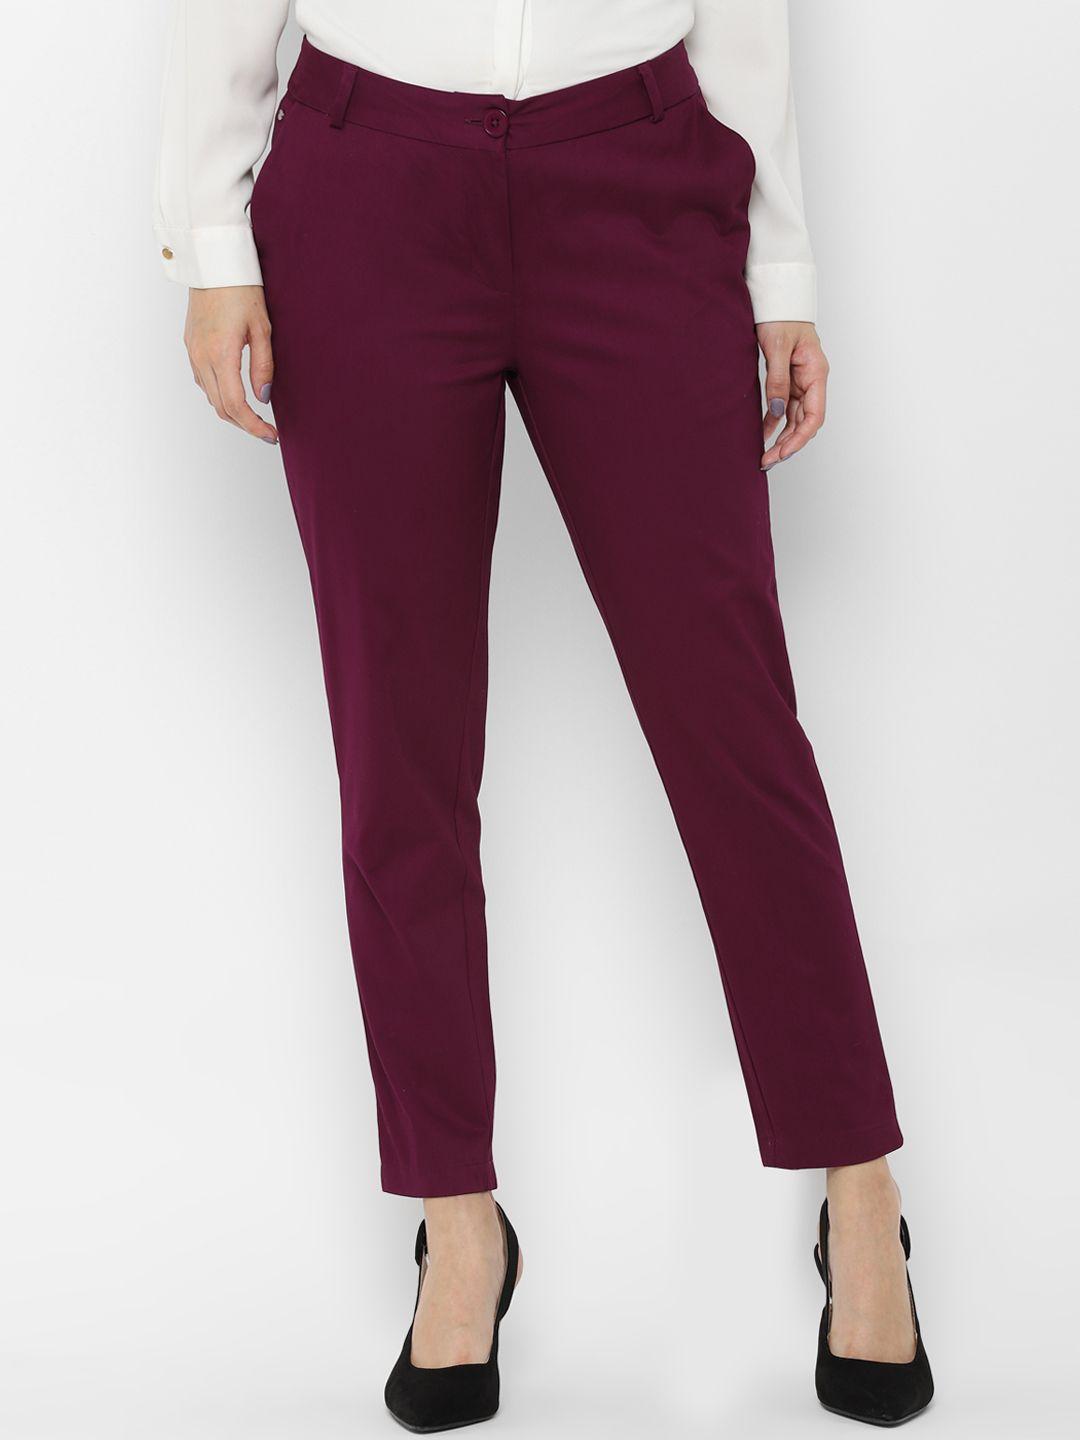 allen solly woman magenta regular fit solid cigarette trousers